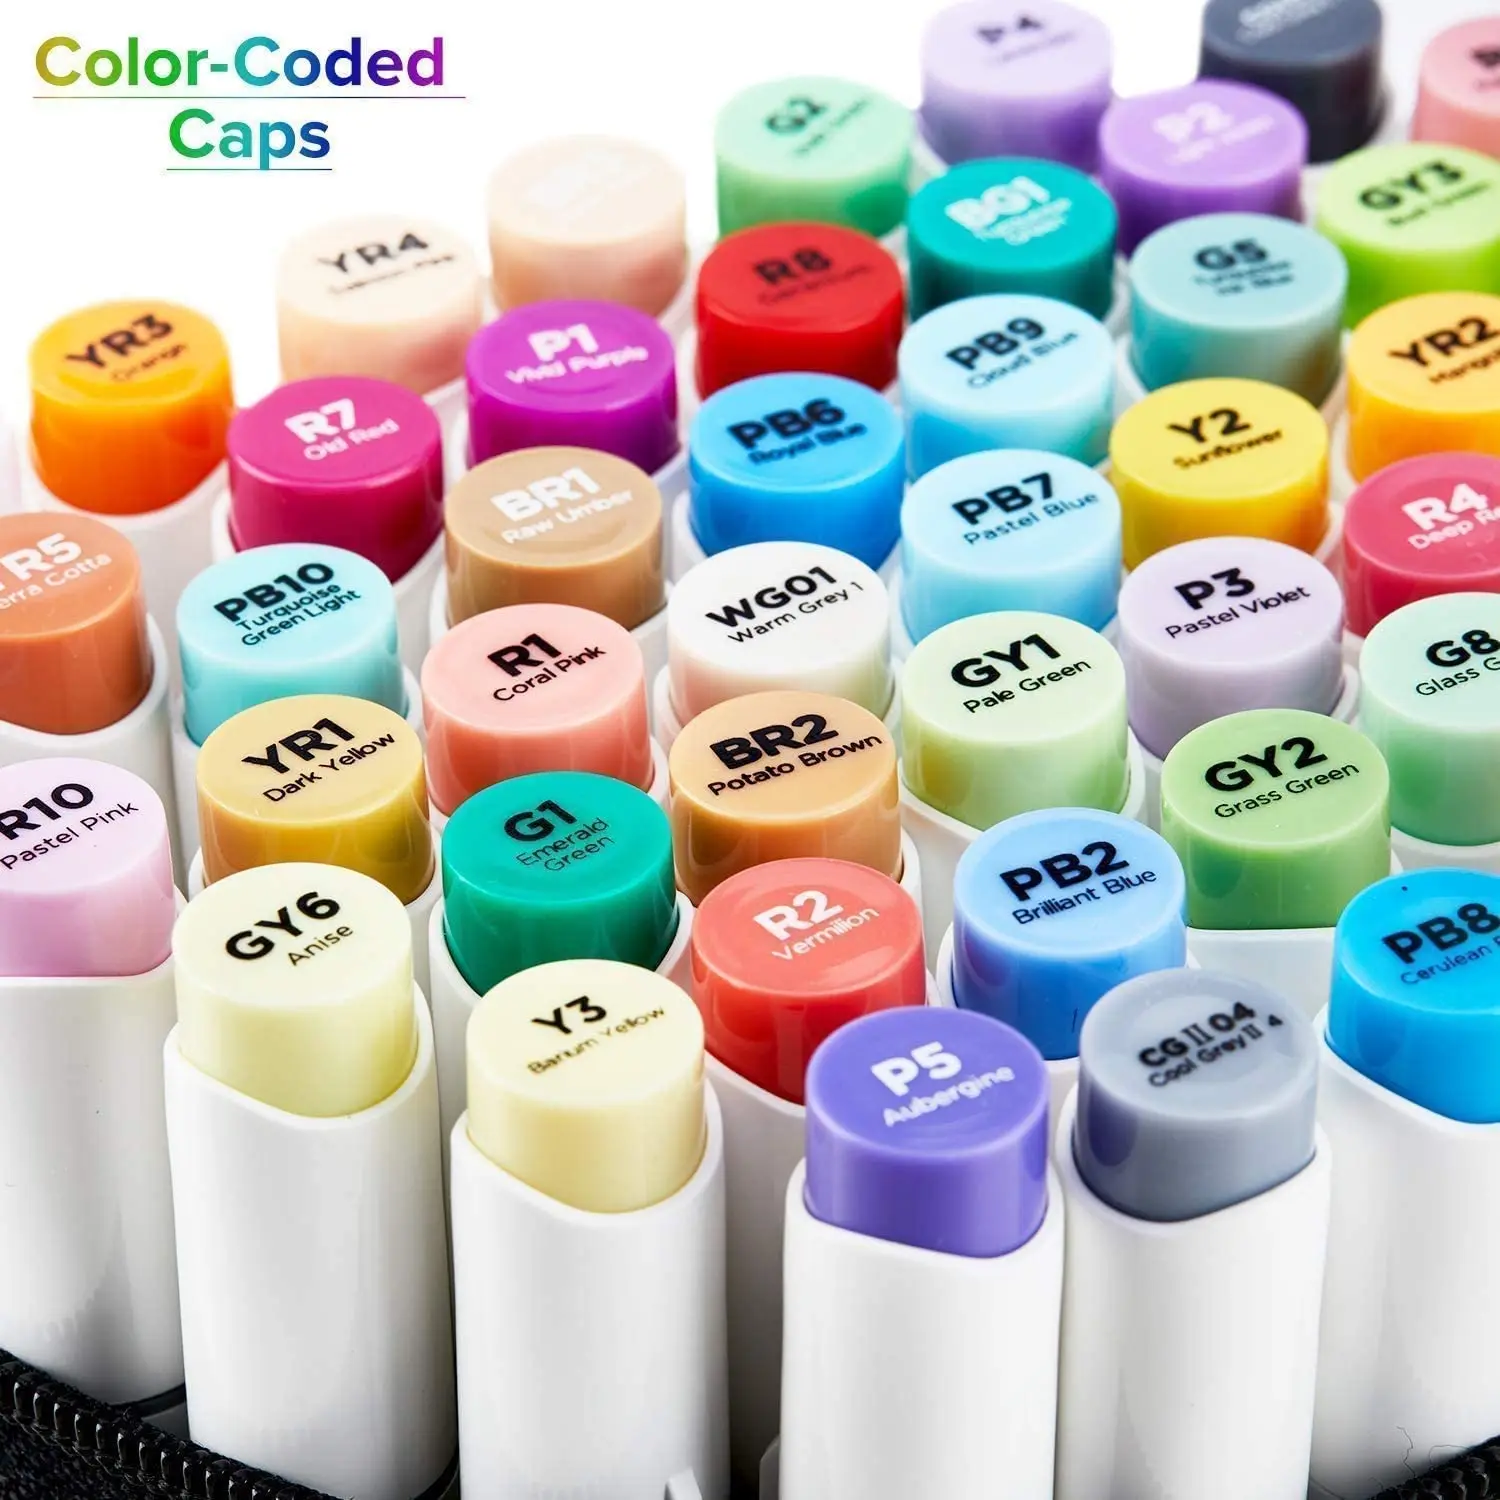 Ohuhu Alcohol Art Markers Set 216 Color Double Tipped Brush